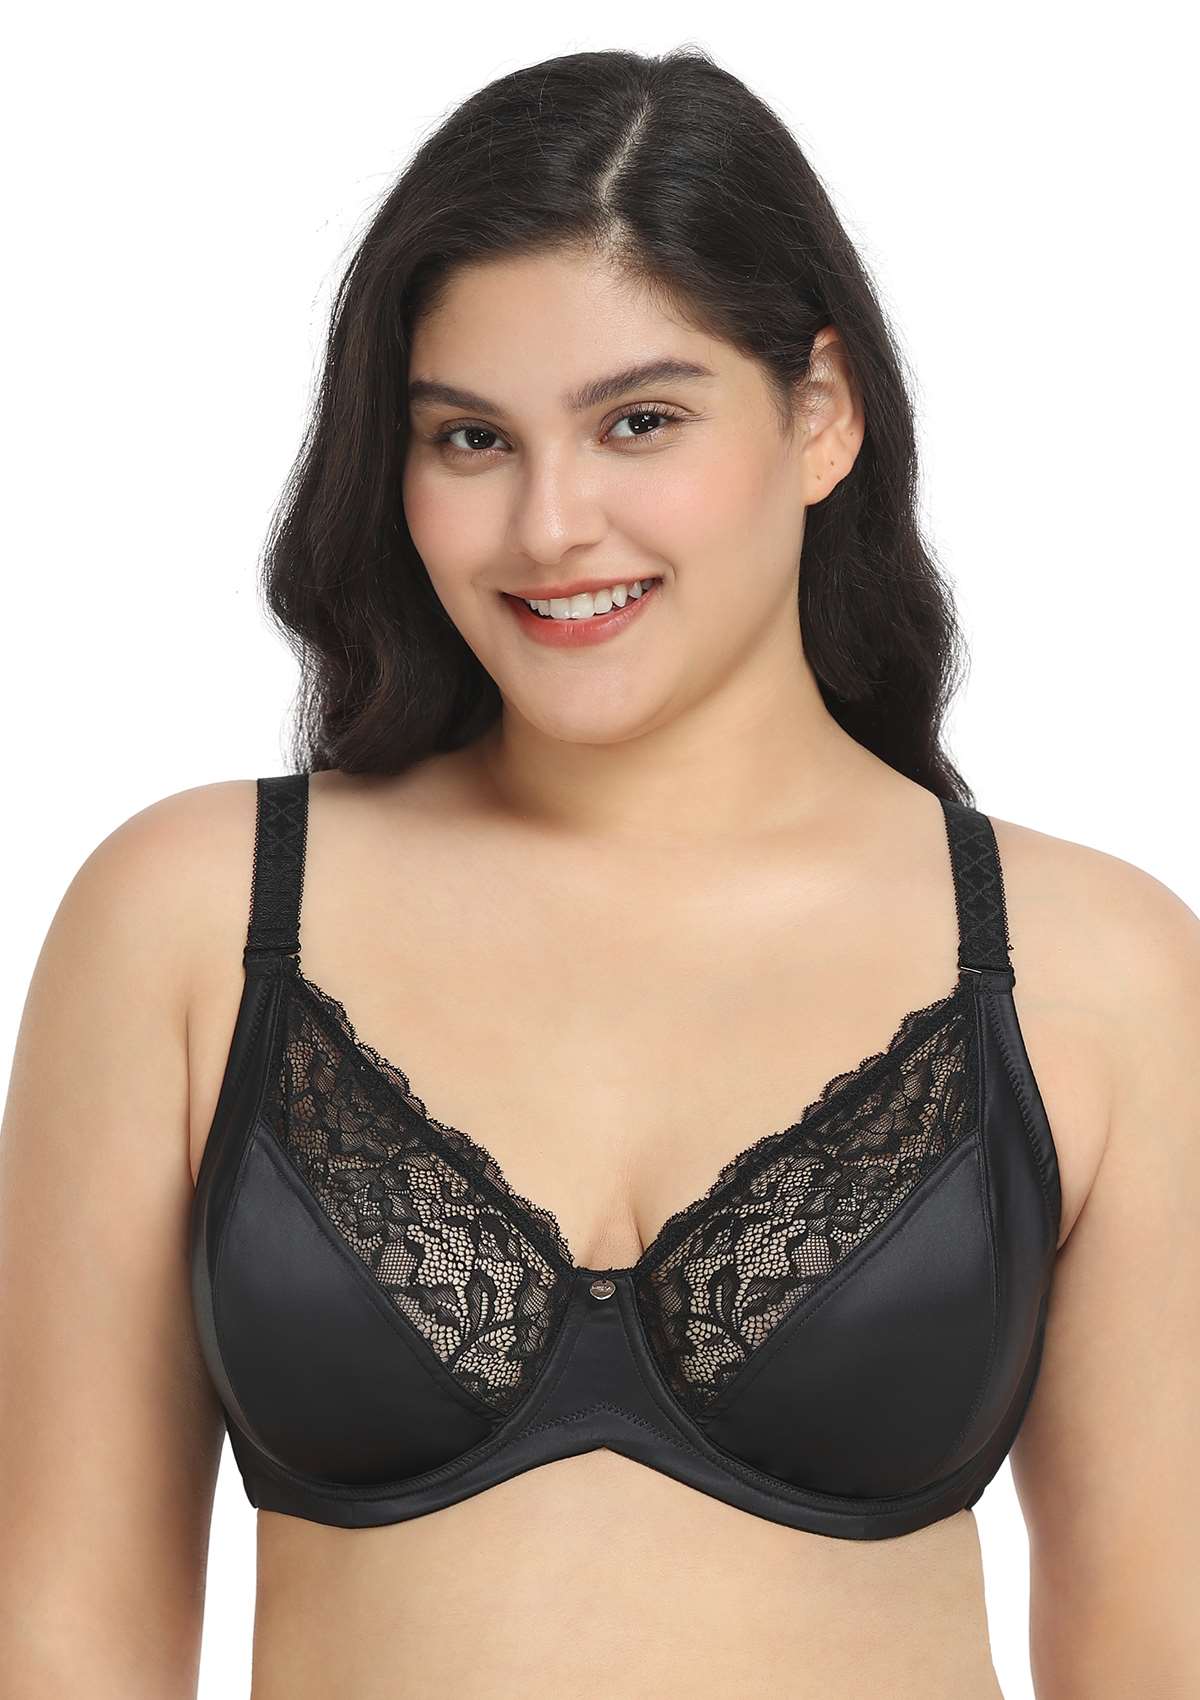 HSIA Foxy Satin Silky Full Coverage Underwire Bra With Floral Lace Trim - Black / 36 / C